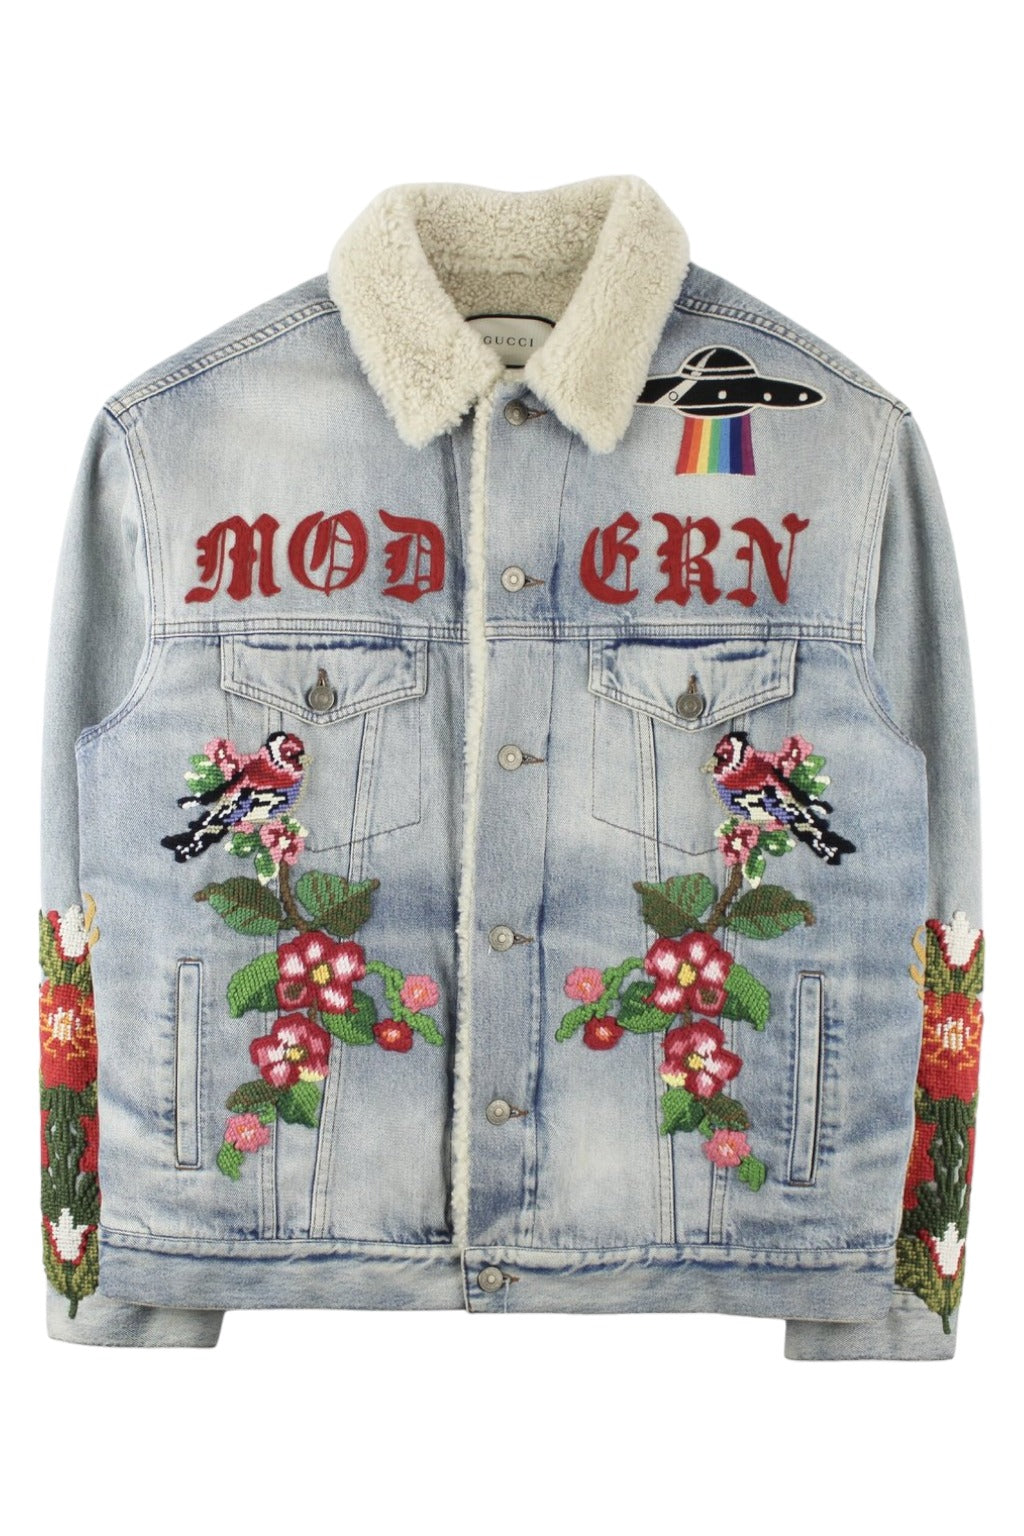 Vintage Mustang Jean Jacket Blanket Lined Customized Embroidery Gucci Style  Distressed Denim - Etsy Israel